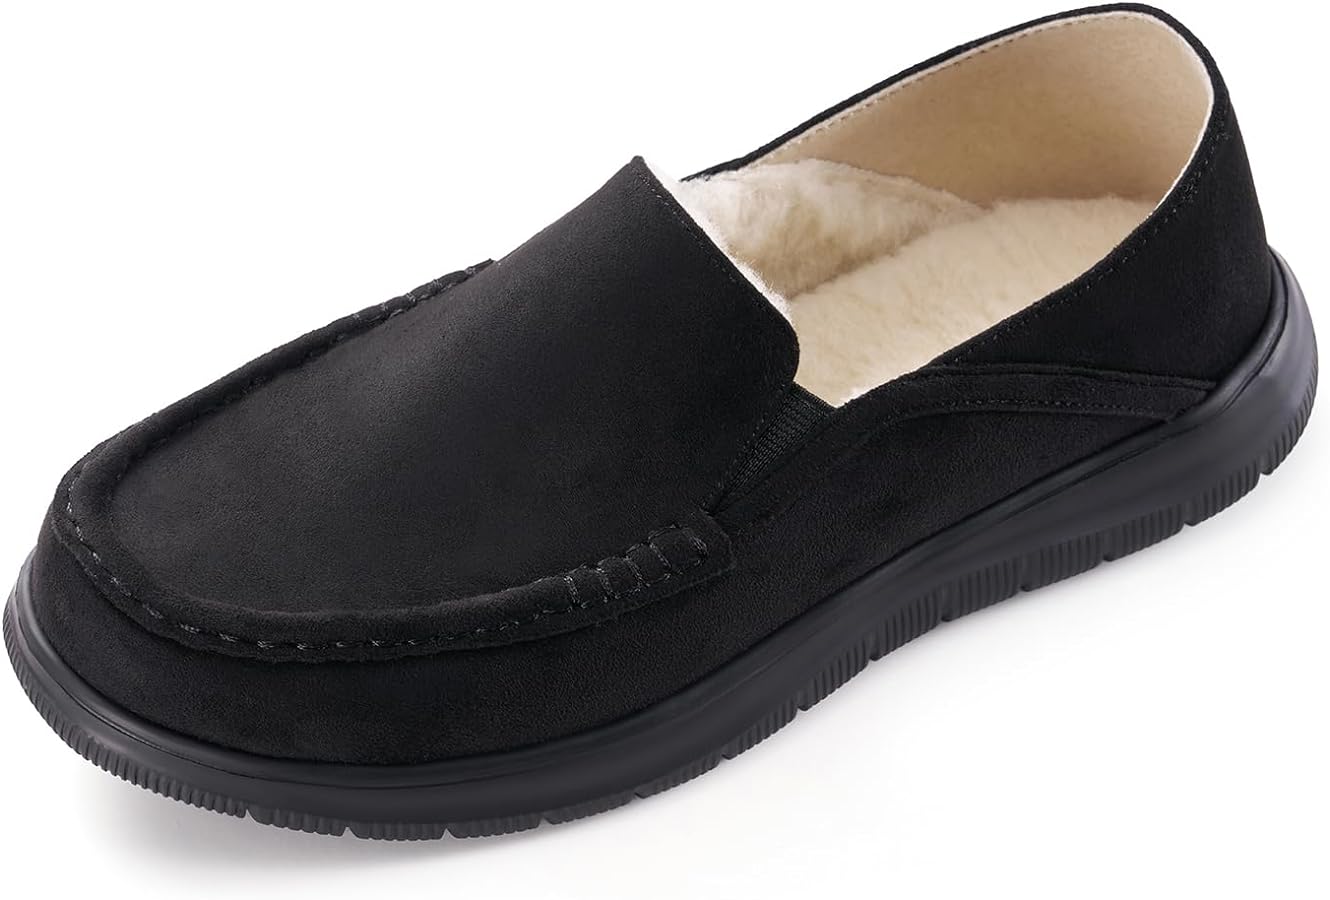 moccasin houseshoes